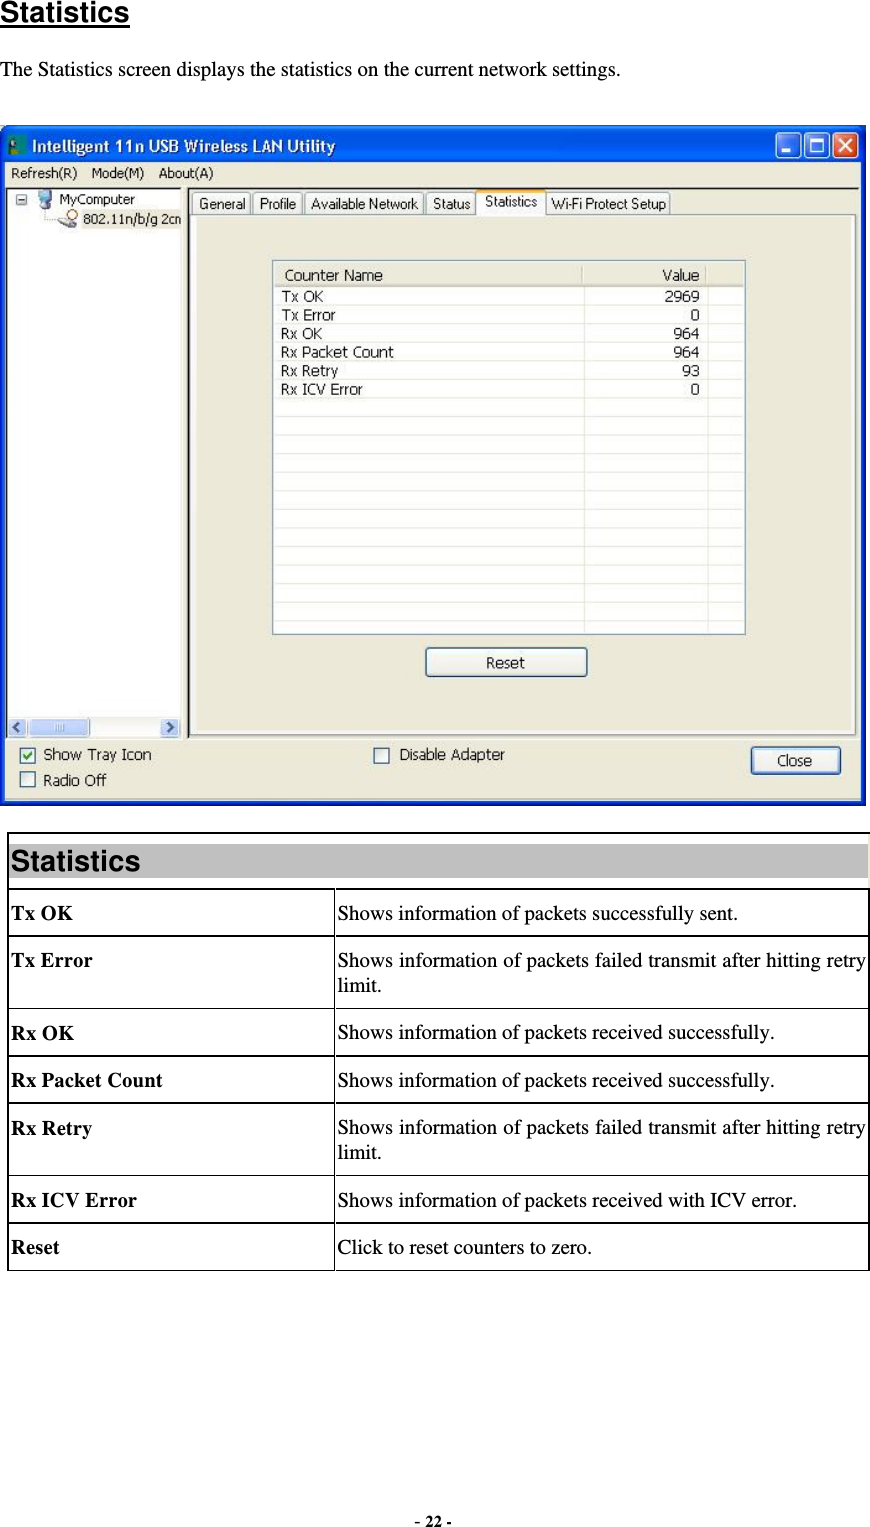  - 22 -  Statistics The Statistics screen displays the statistics on the current network settings.  Statistics Tx OK  Shows information of packets successfully sent. Tx Error  Shows information of packets failed transmit after hitting retry limit. Rx OK  Shows information of packets received successfully. Rx Packet Count  Shows information of packets received successfully. Rx Retry  Shows information of packets failed transmit after hitting retry limit. Rx ICV Error  Shows information of packets received with ICV error. Reset  Click to reset counters to zero.   